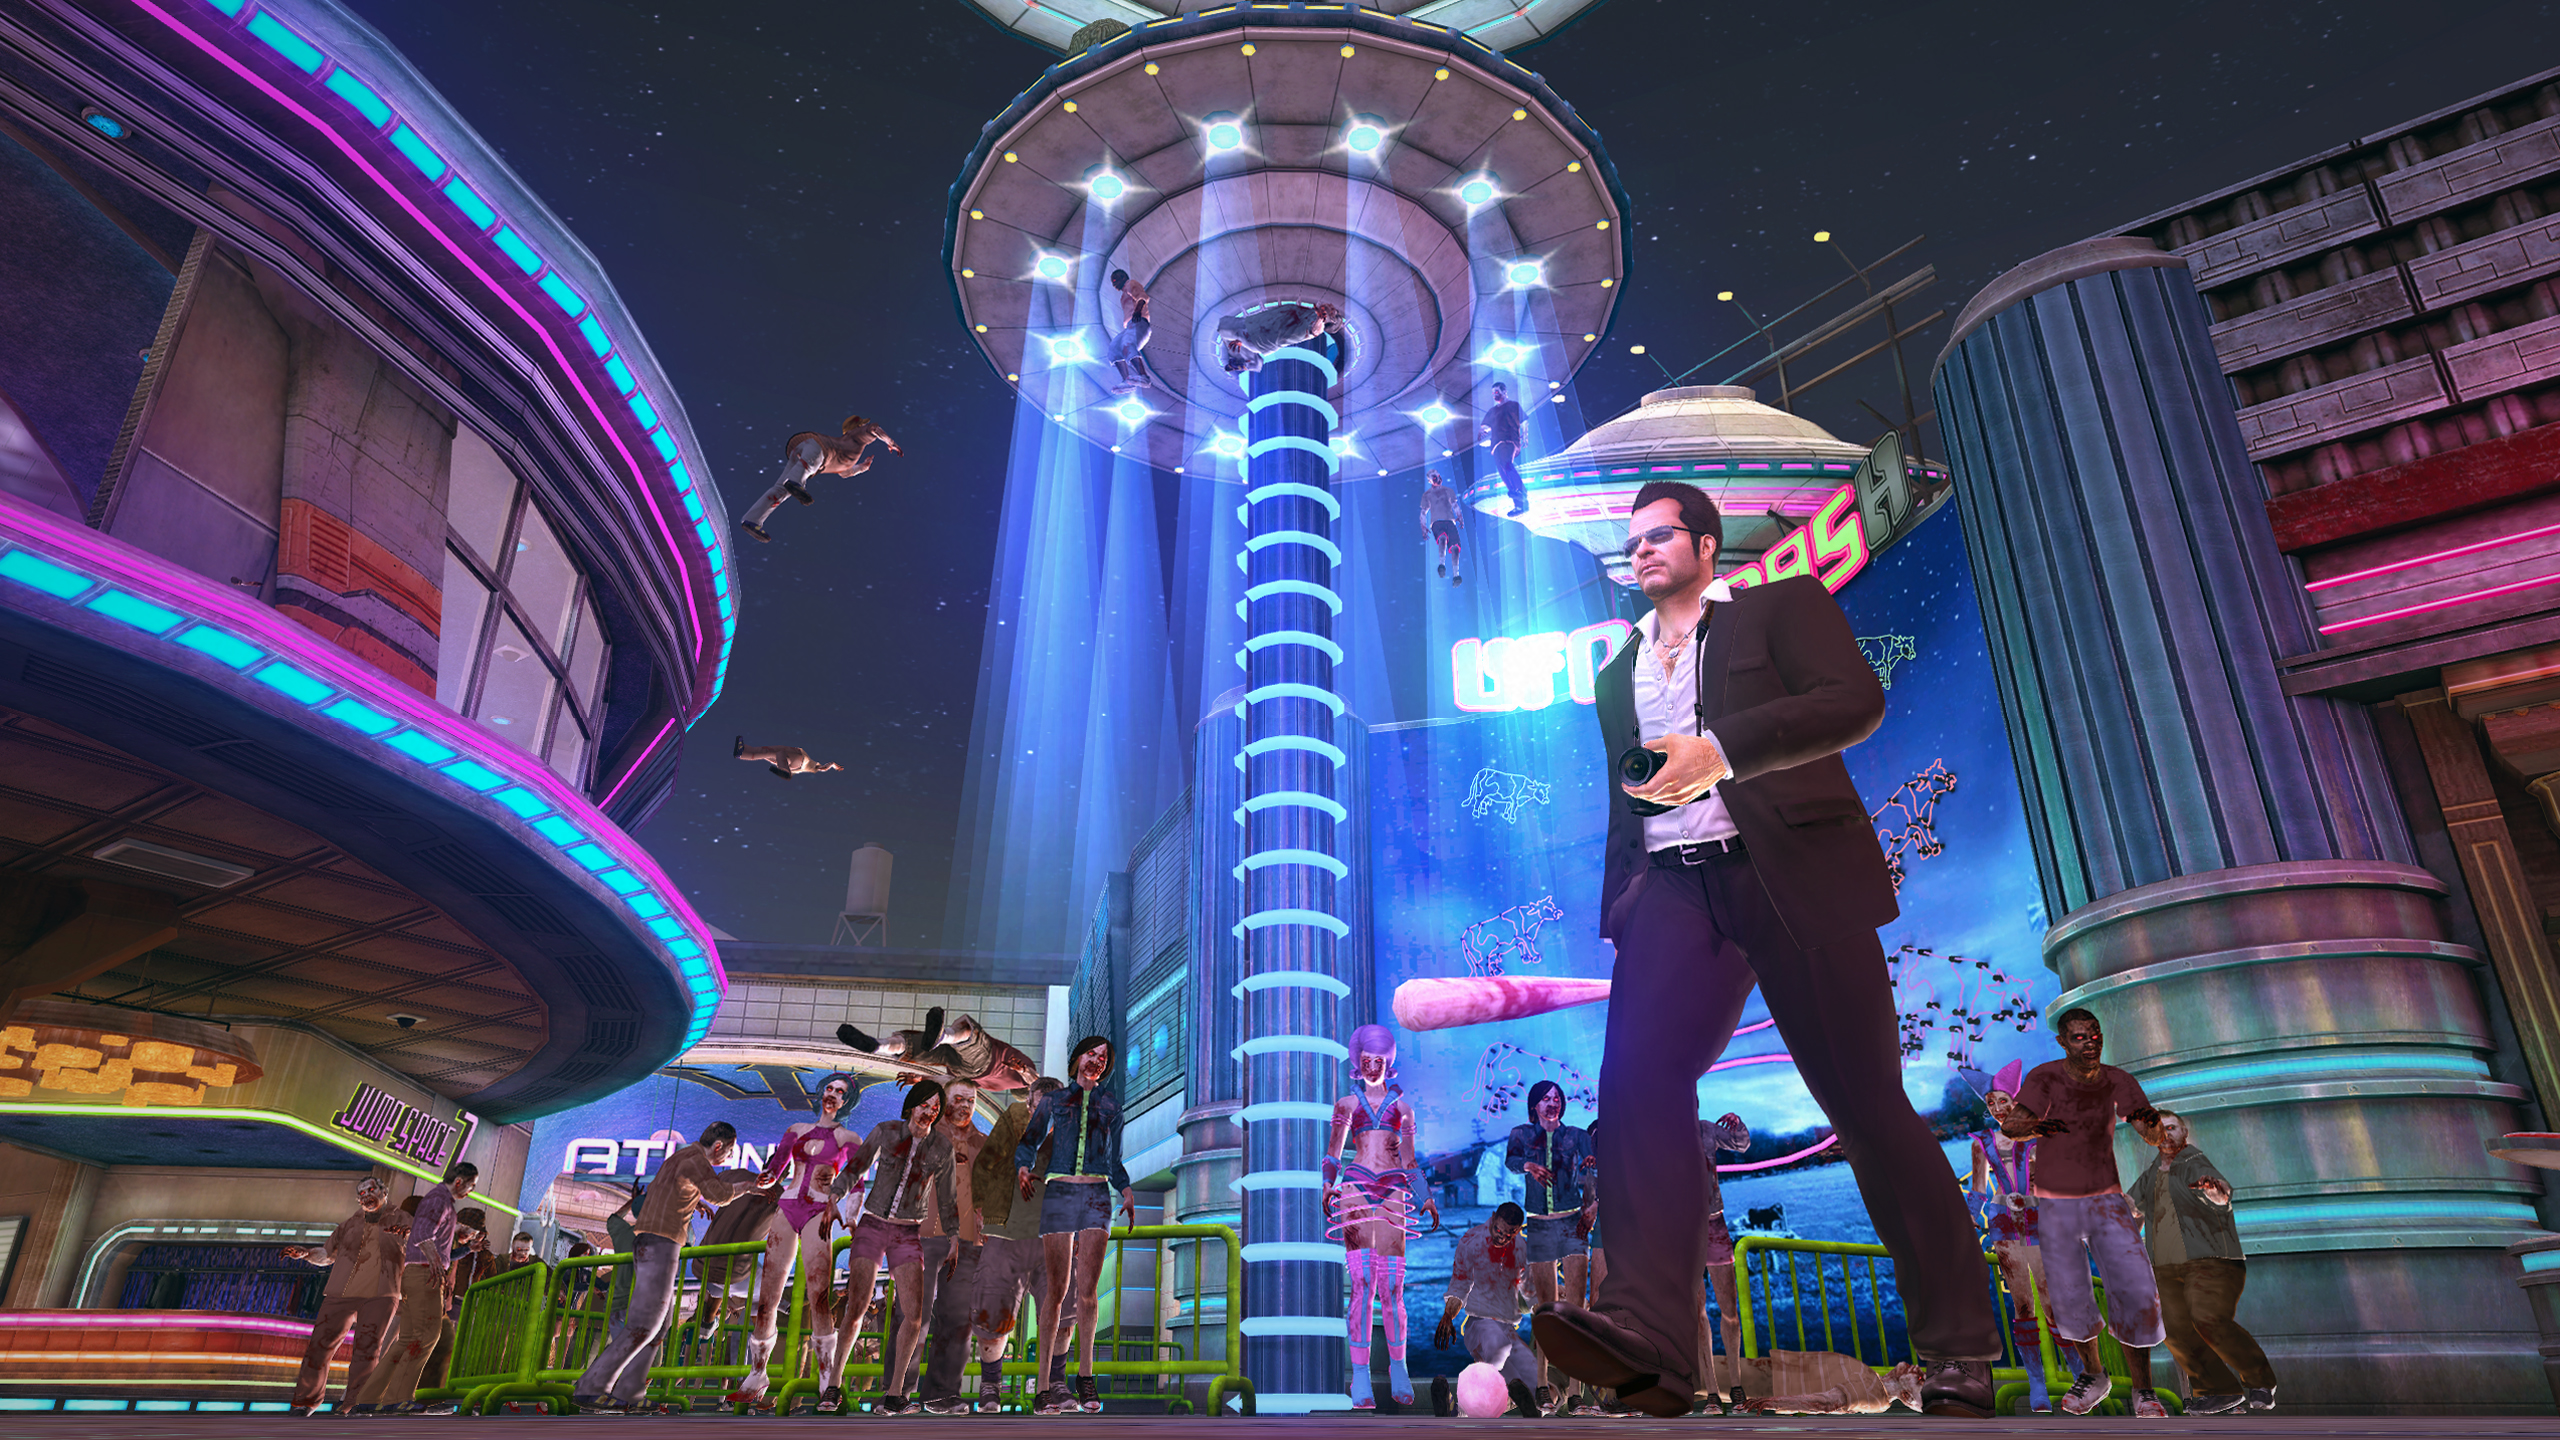 Co-Optimus - Review - Dead Rising 2: Off the Record Co-Op Review